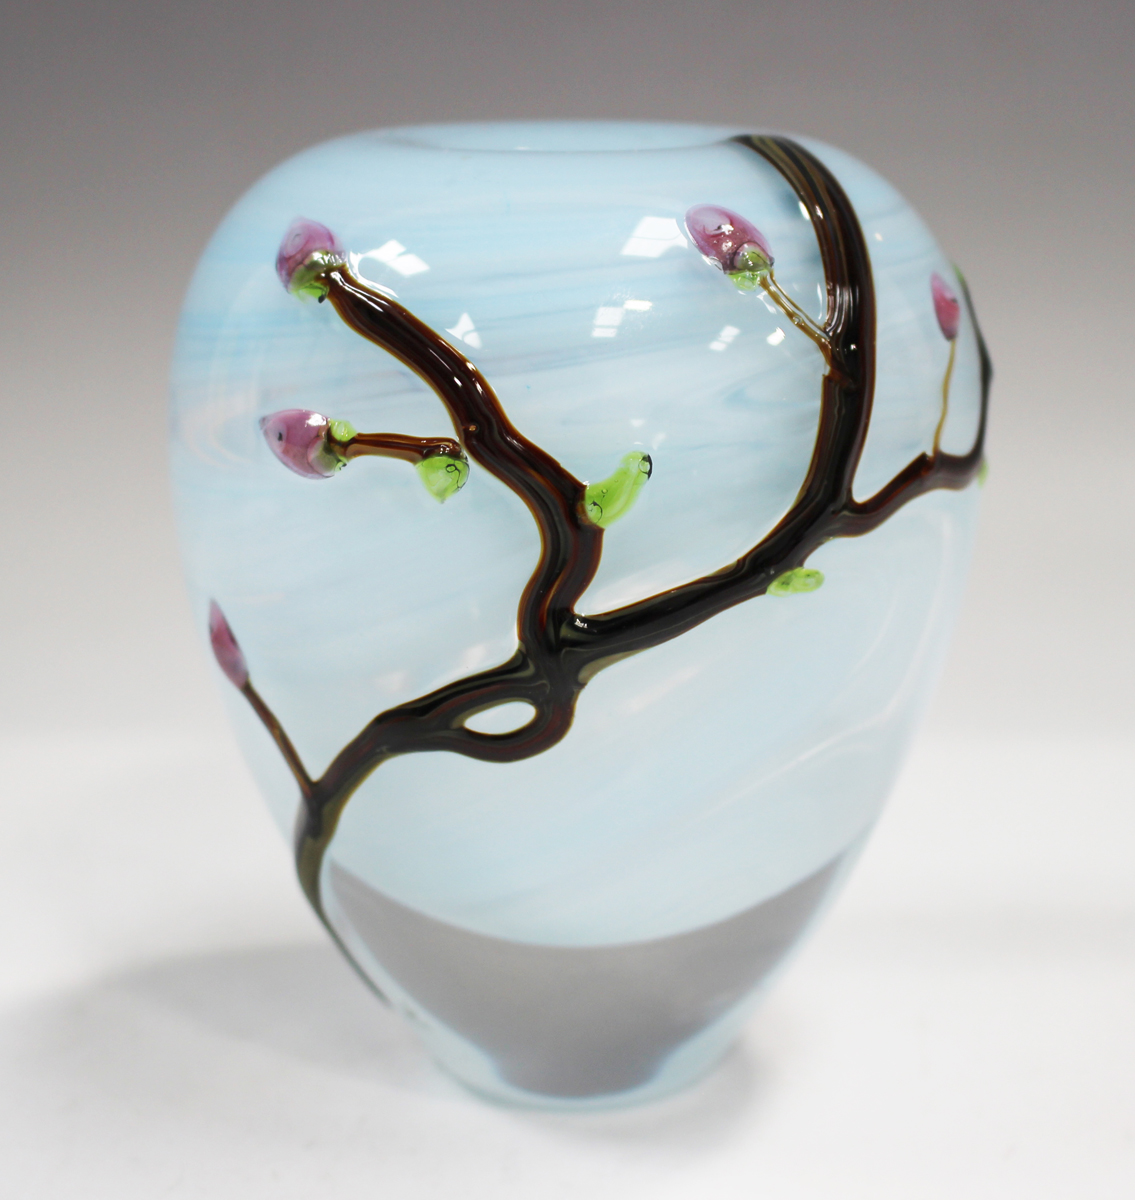 A Siddy Langley studio glass vase, circa 2022, decorated with budding tree branches against a pale